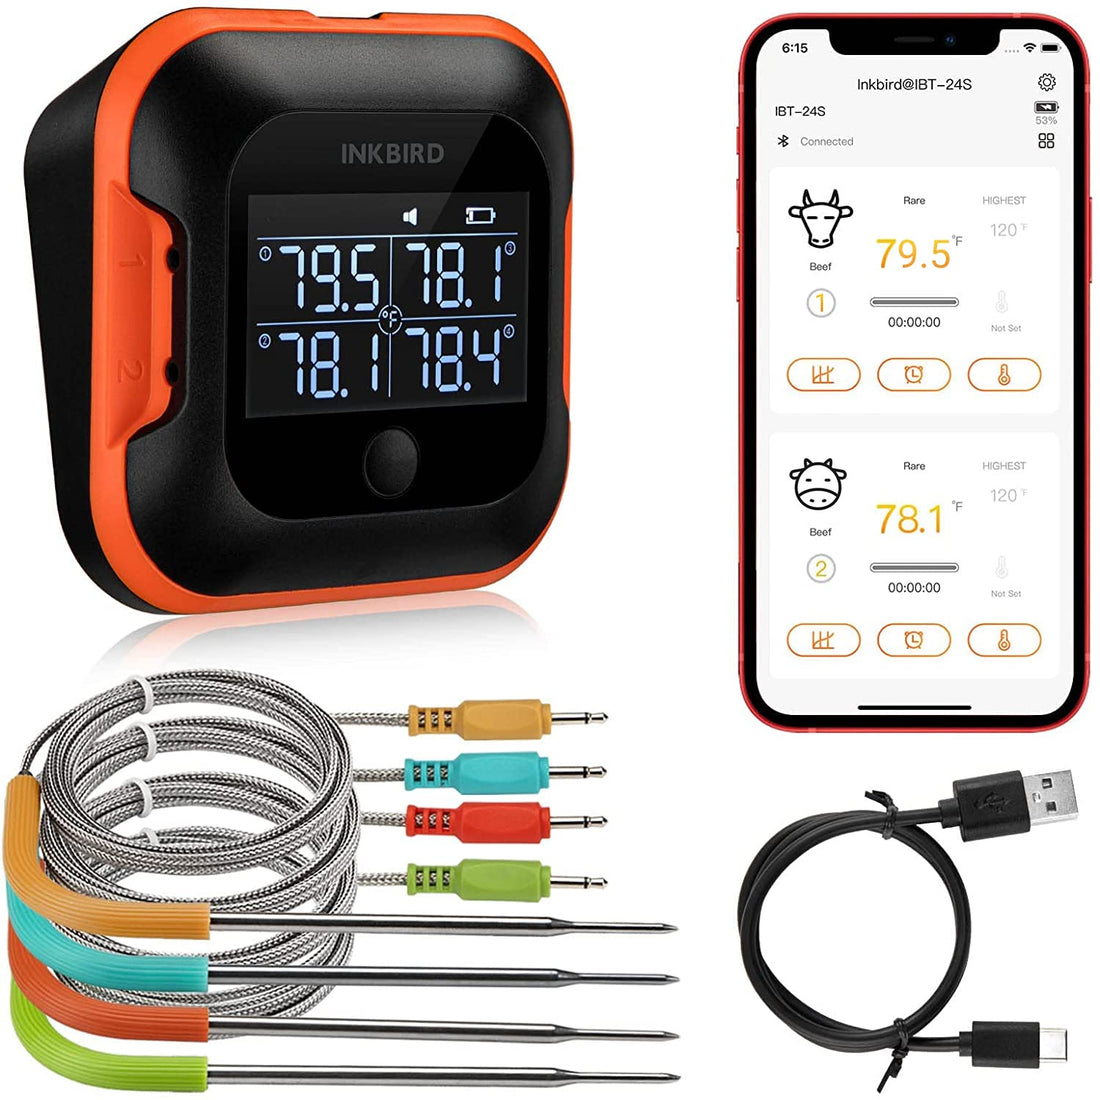 Inkbird 150ft Bluetooth Meat Thermometer with 4 Colored Probes, Temperature Graph Real-time Check & Download BBQ Grill Thermometer for Kitchen Food Smoker Thermometer IBT-24S, Rechargeable